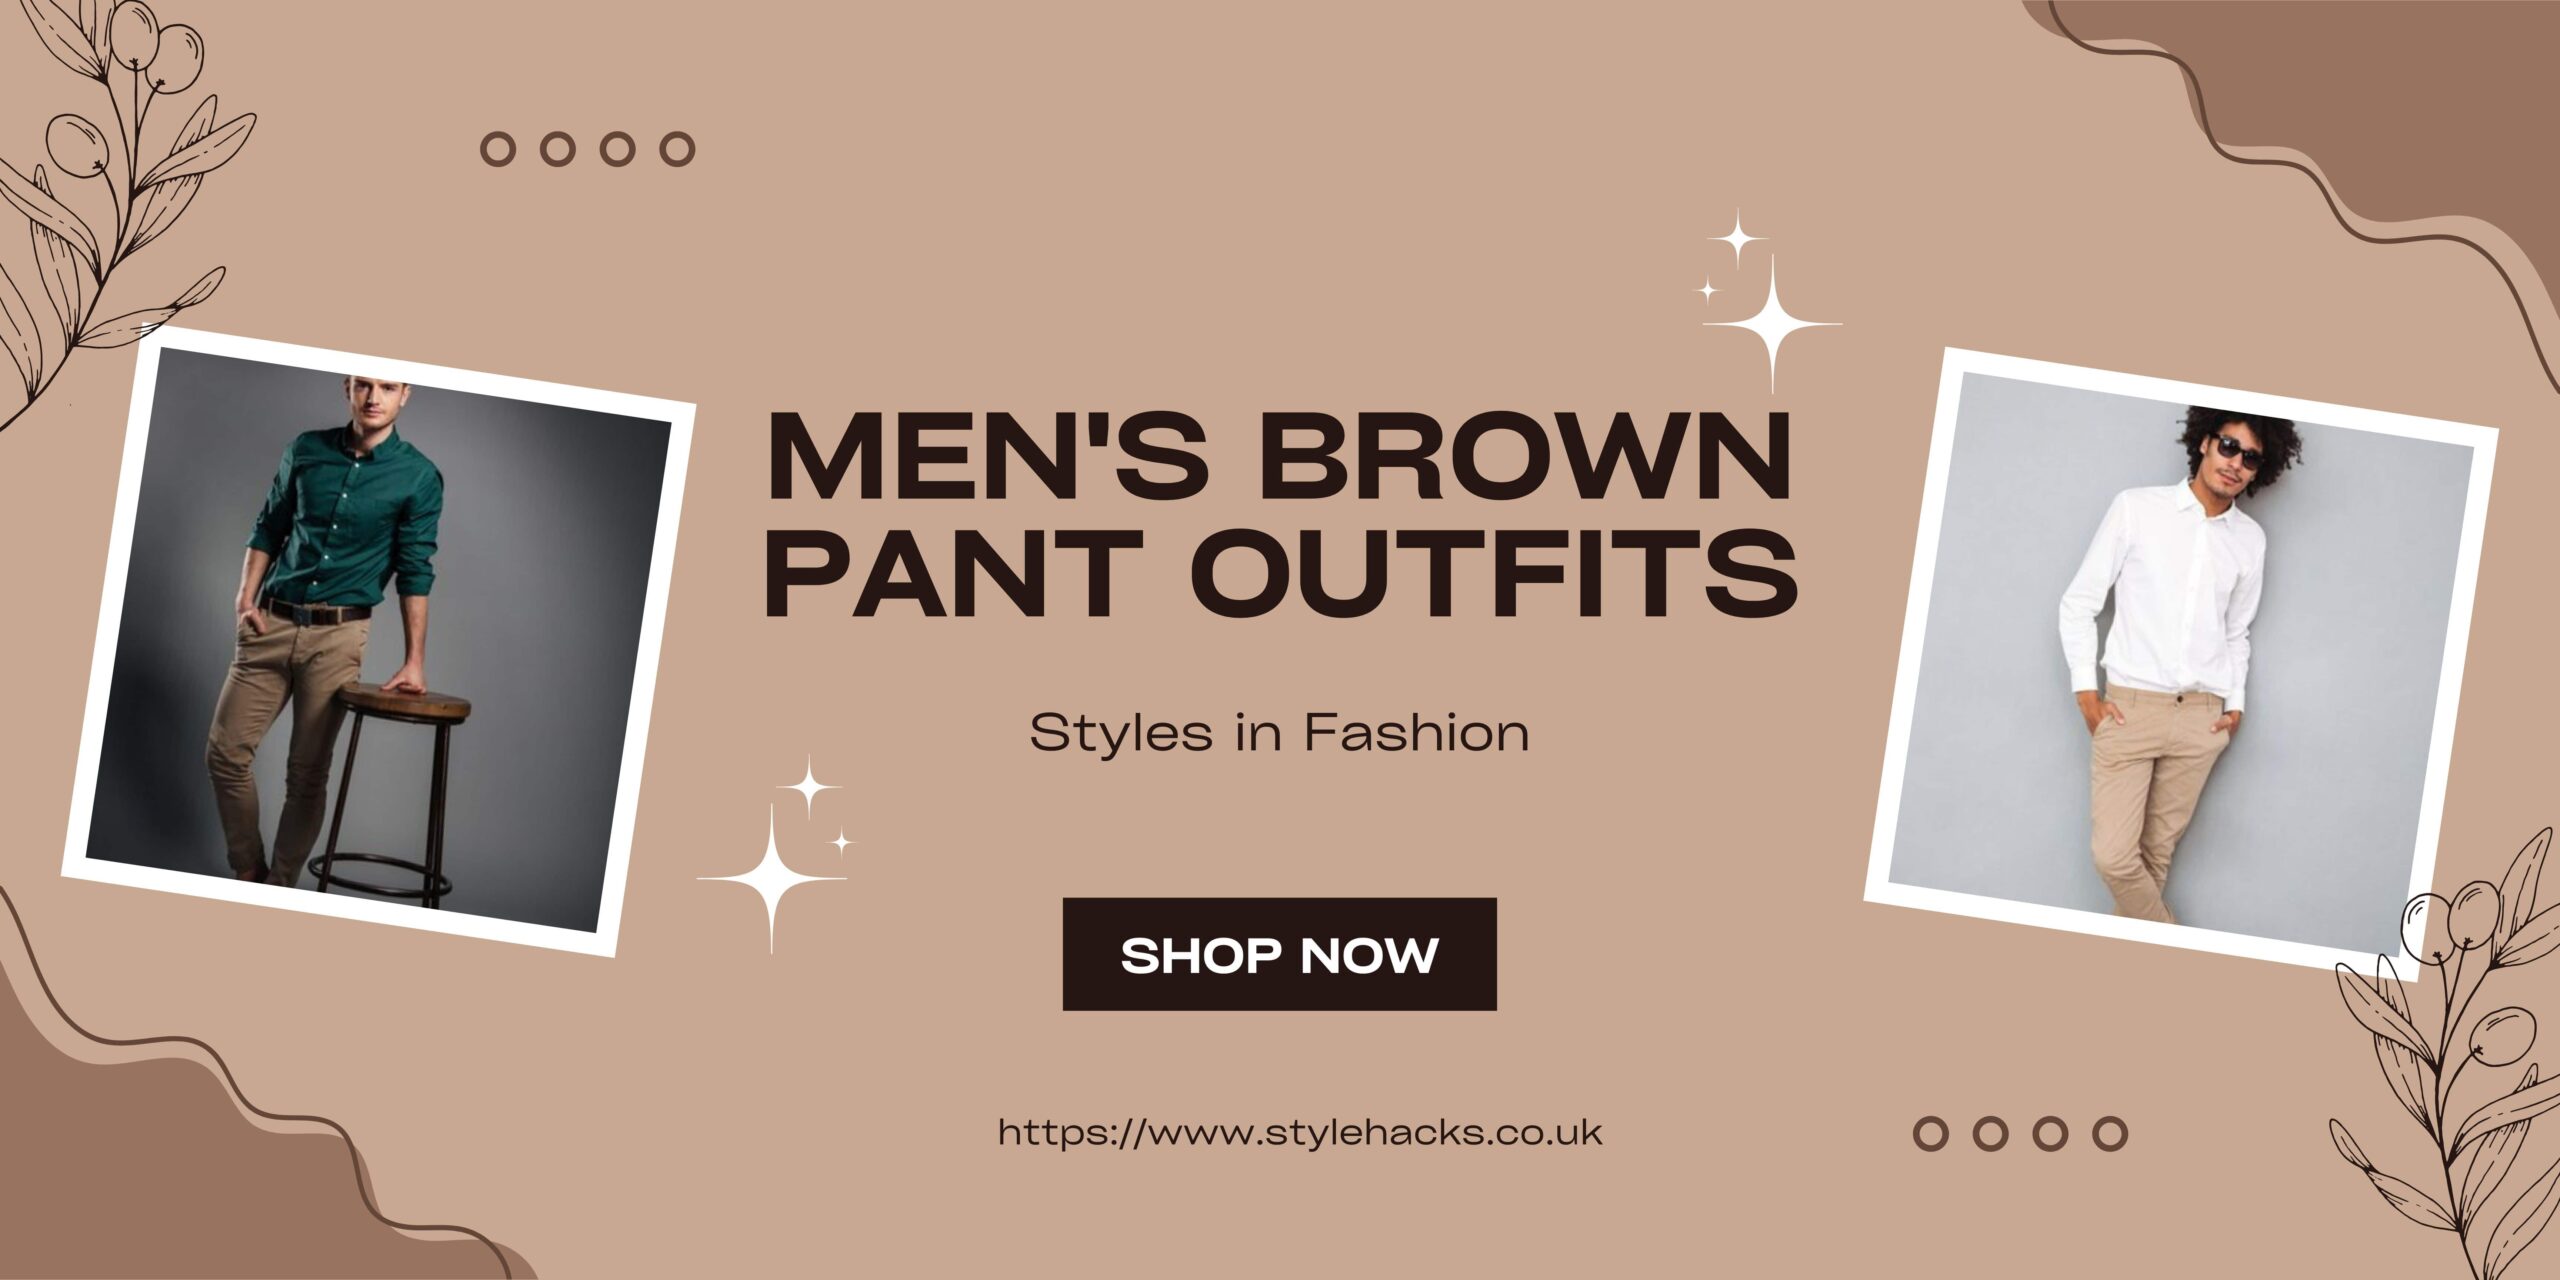 Men's Brown Pants Outfit Styles